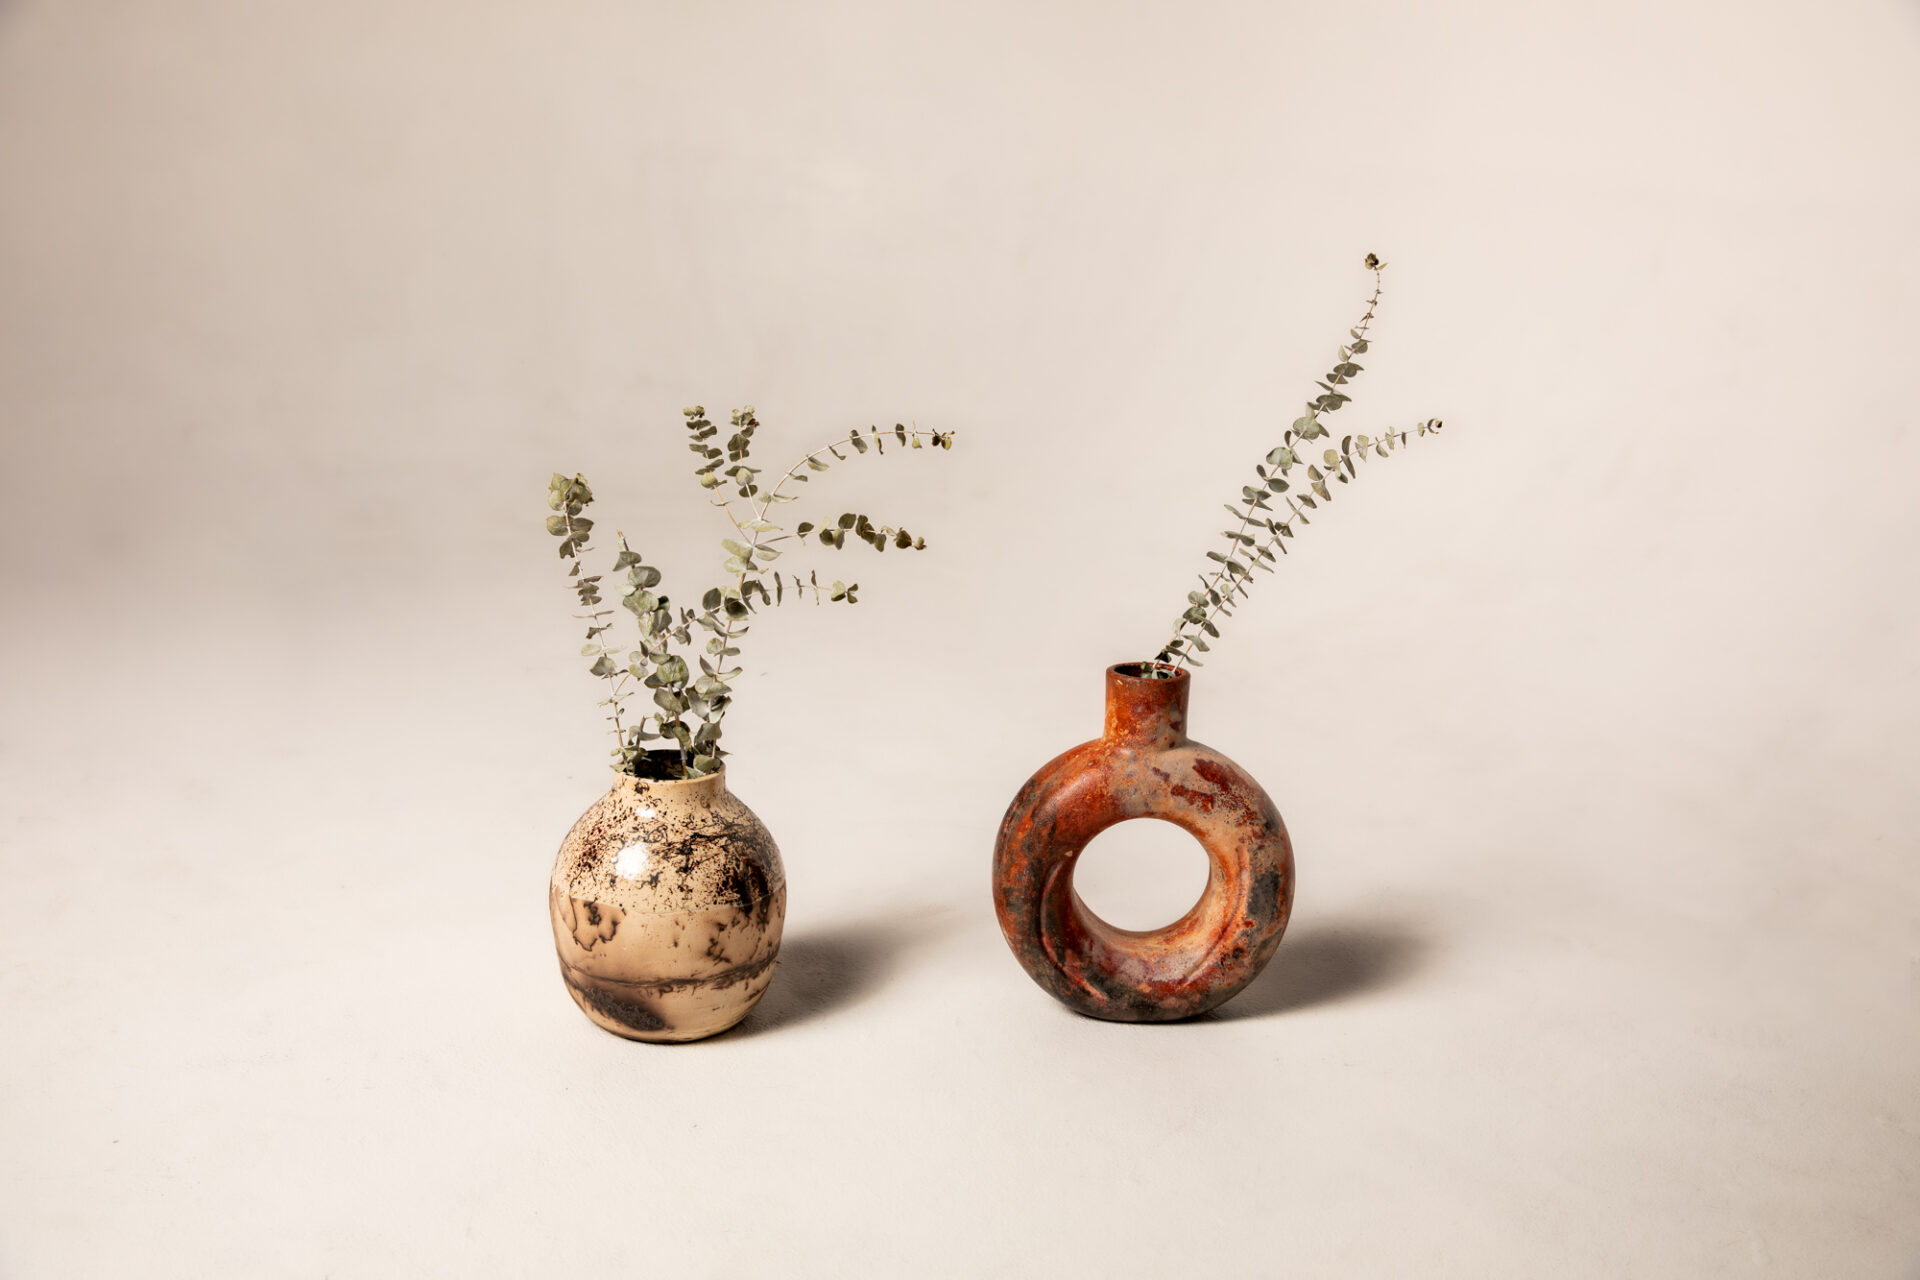 Argentinian Ceramicist, Rocio Perez, hand thrown and turned on the potter's wheel, with hand dipped or brushed glaze application. The nature of our goods allows for slight variances among sets being sold, glaze colors, shapes, and sizes.